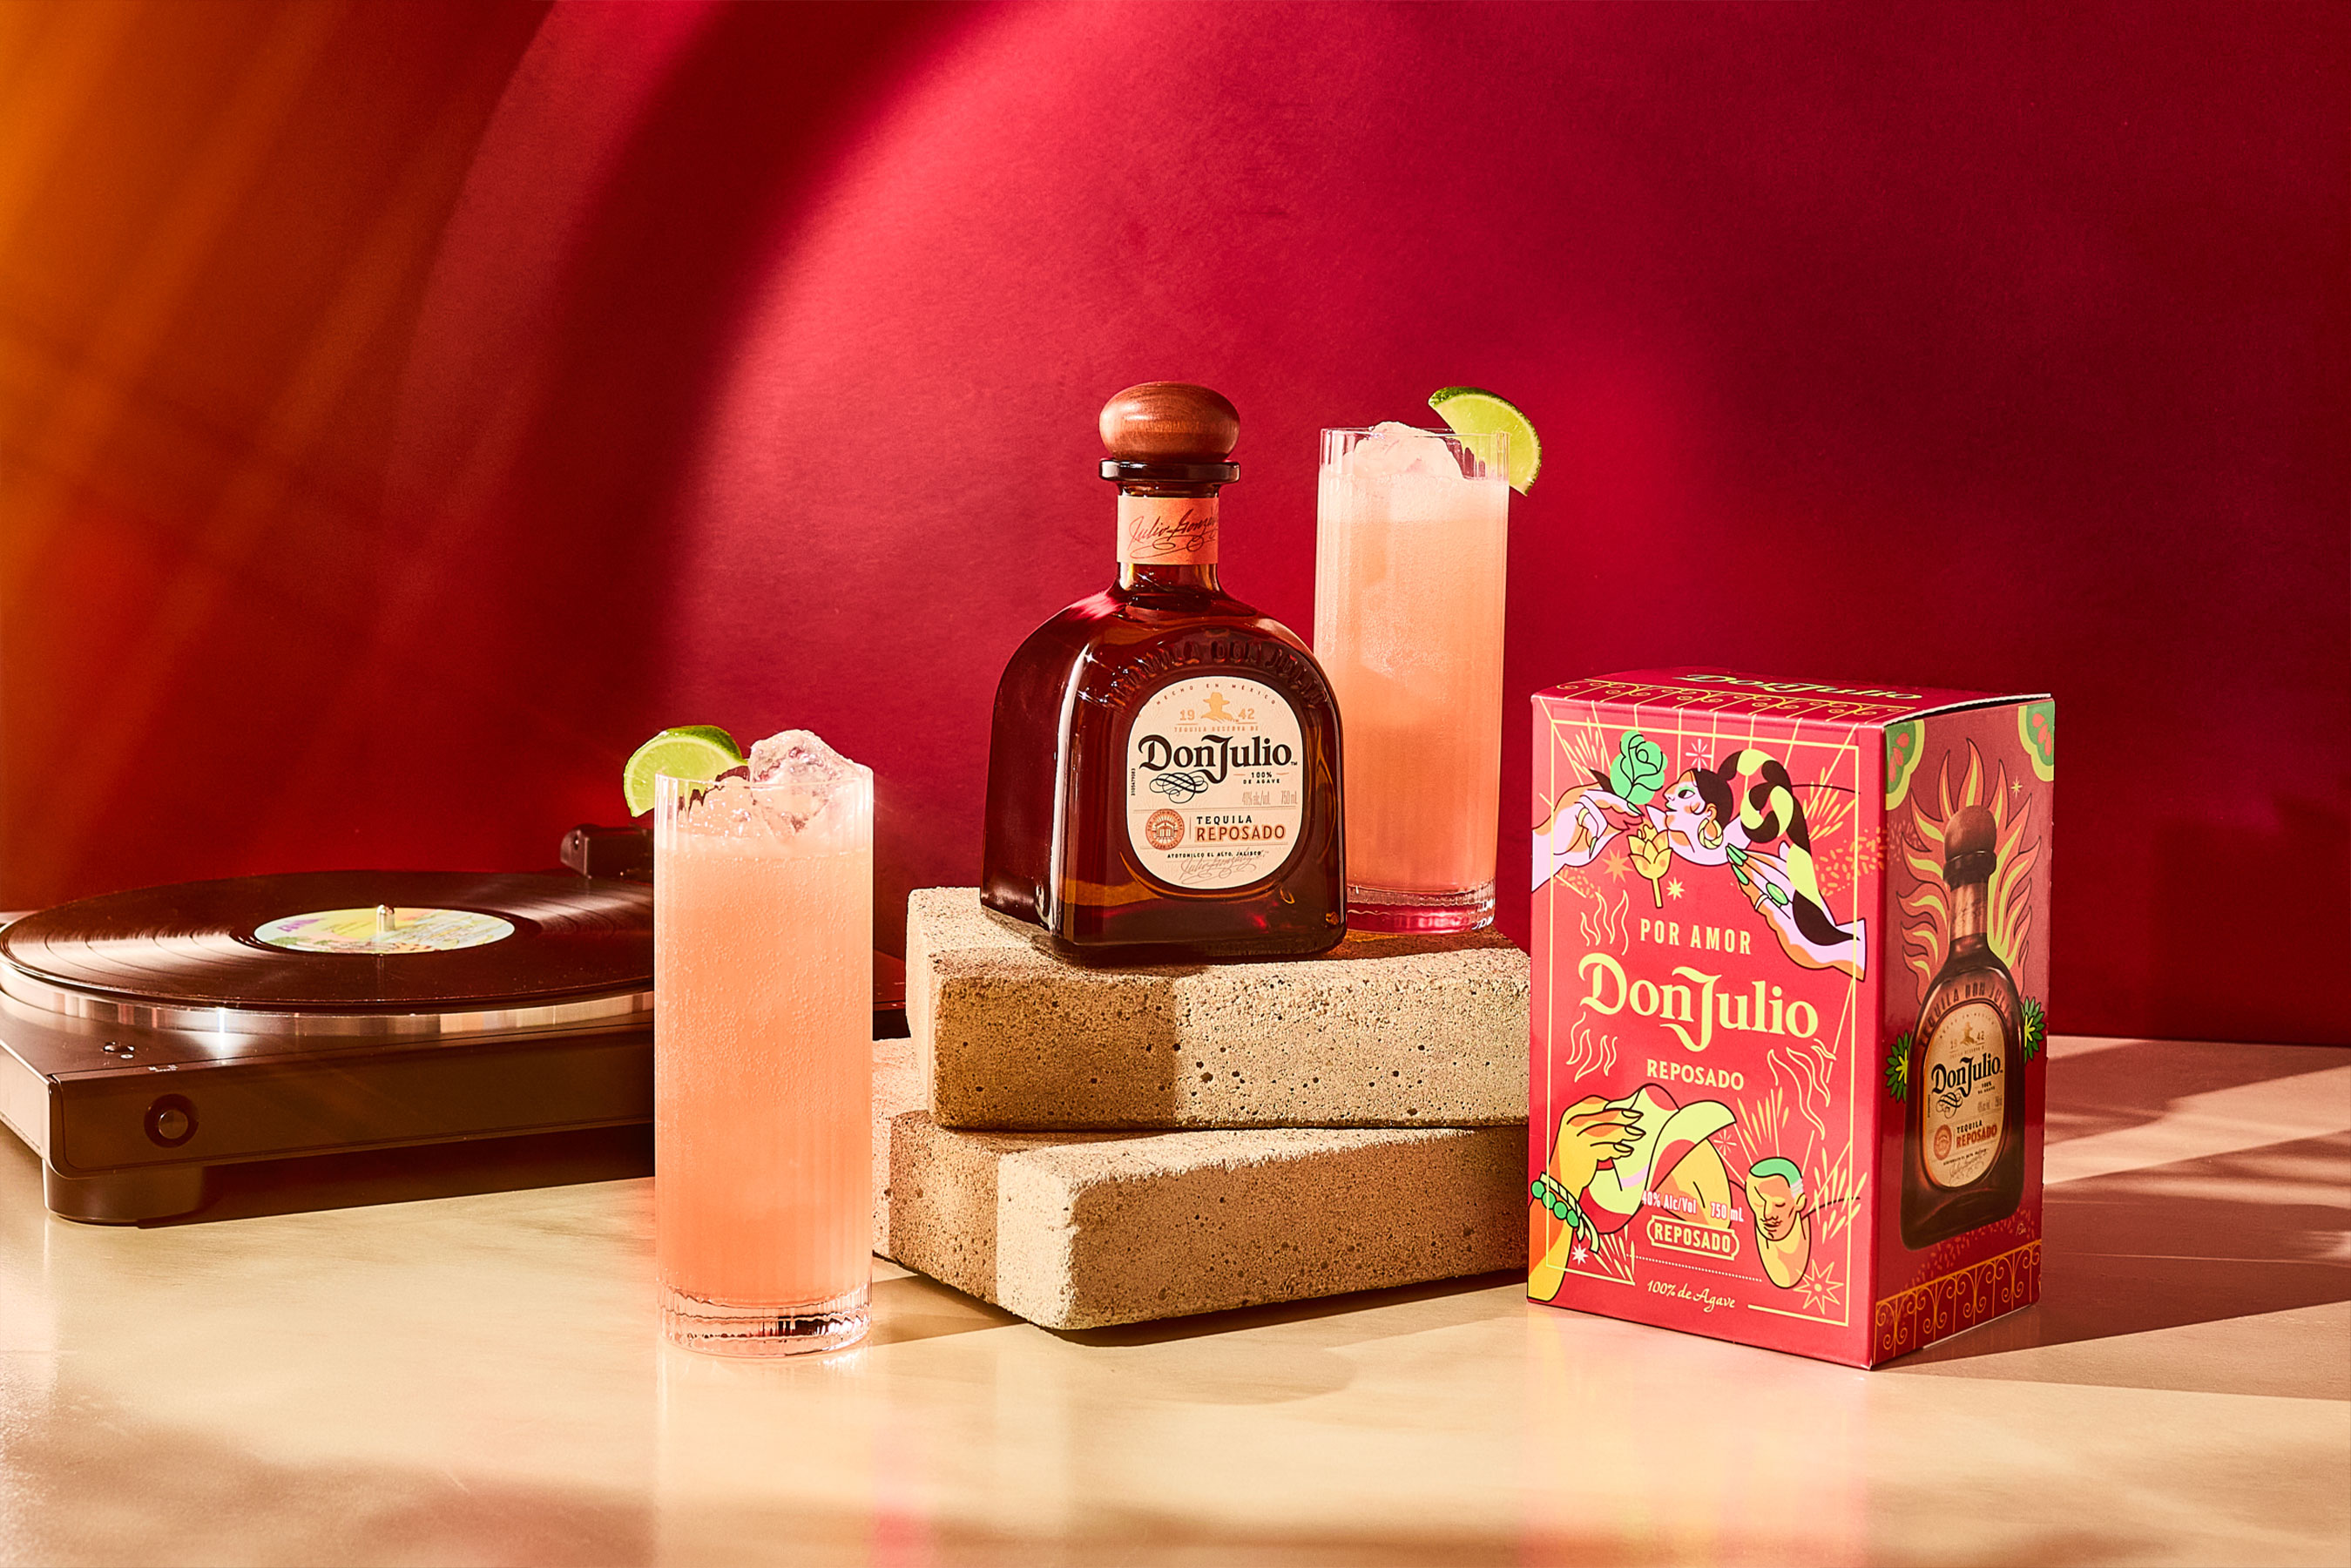 Tequila Don Julio Reposado ‘A Summer of Mexicana' Artist Edition and signature Paloma cocktail.